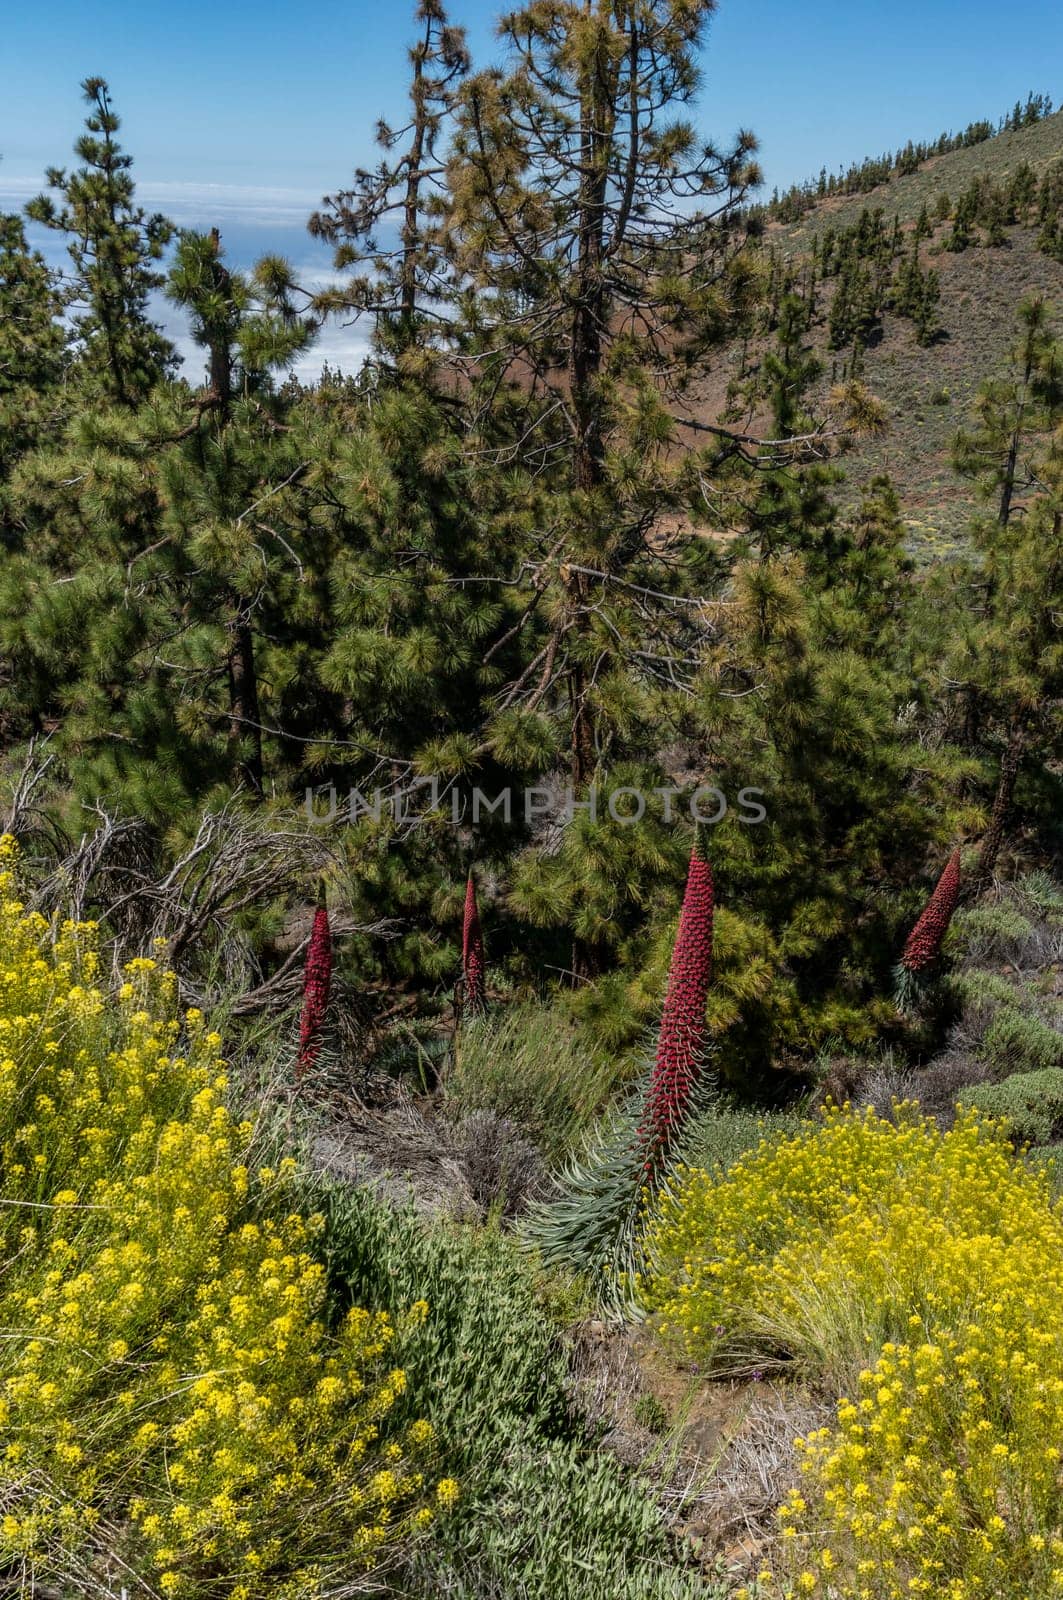 Red Flower of tajinaste rojo among Canary Island pine trees and yellow flowers. Endemics to the Canary islands. Mountain background. Echium wildpretii, tower of jewels, red bugloss, Tenerife bugloss